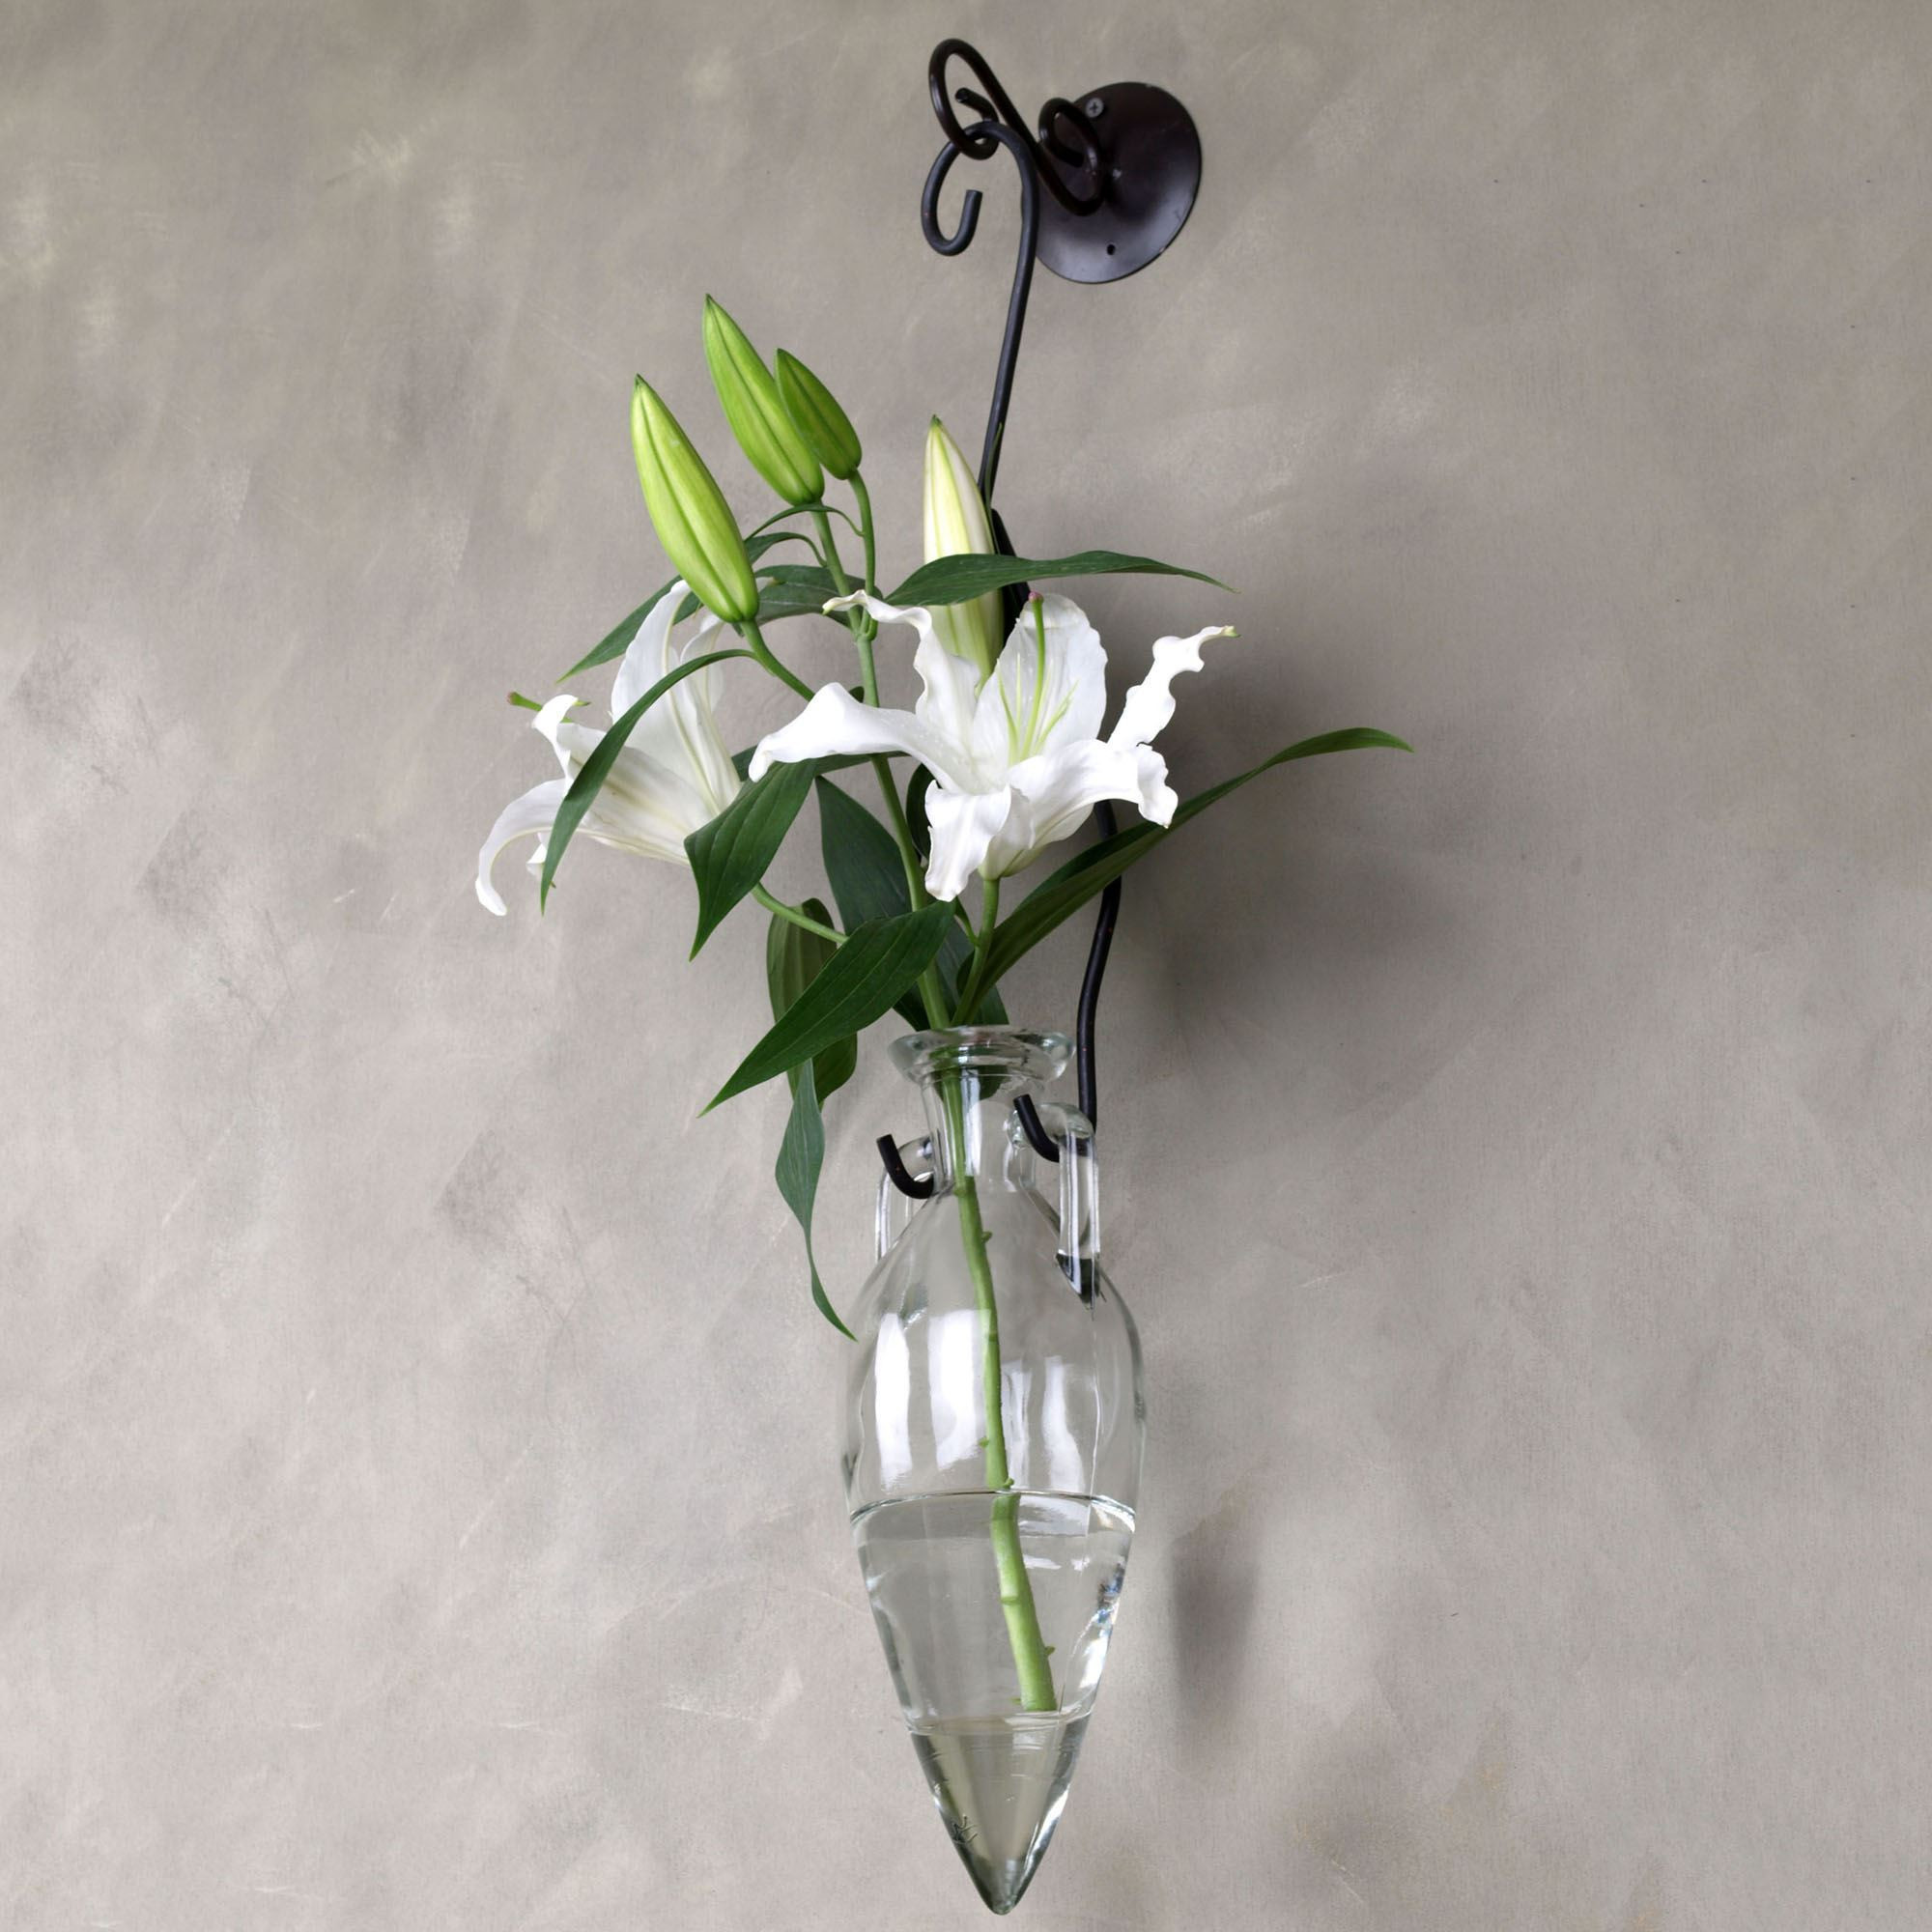 23 attractive Glass Bubble Wall Vase 2024 free download glass bubble wall vase of collection of hanging glass vases wall vases artificial plants with hanging glass vases wall gallery h vases wall hanging flower vase newspaper i 0d scheme wall